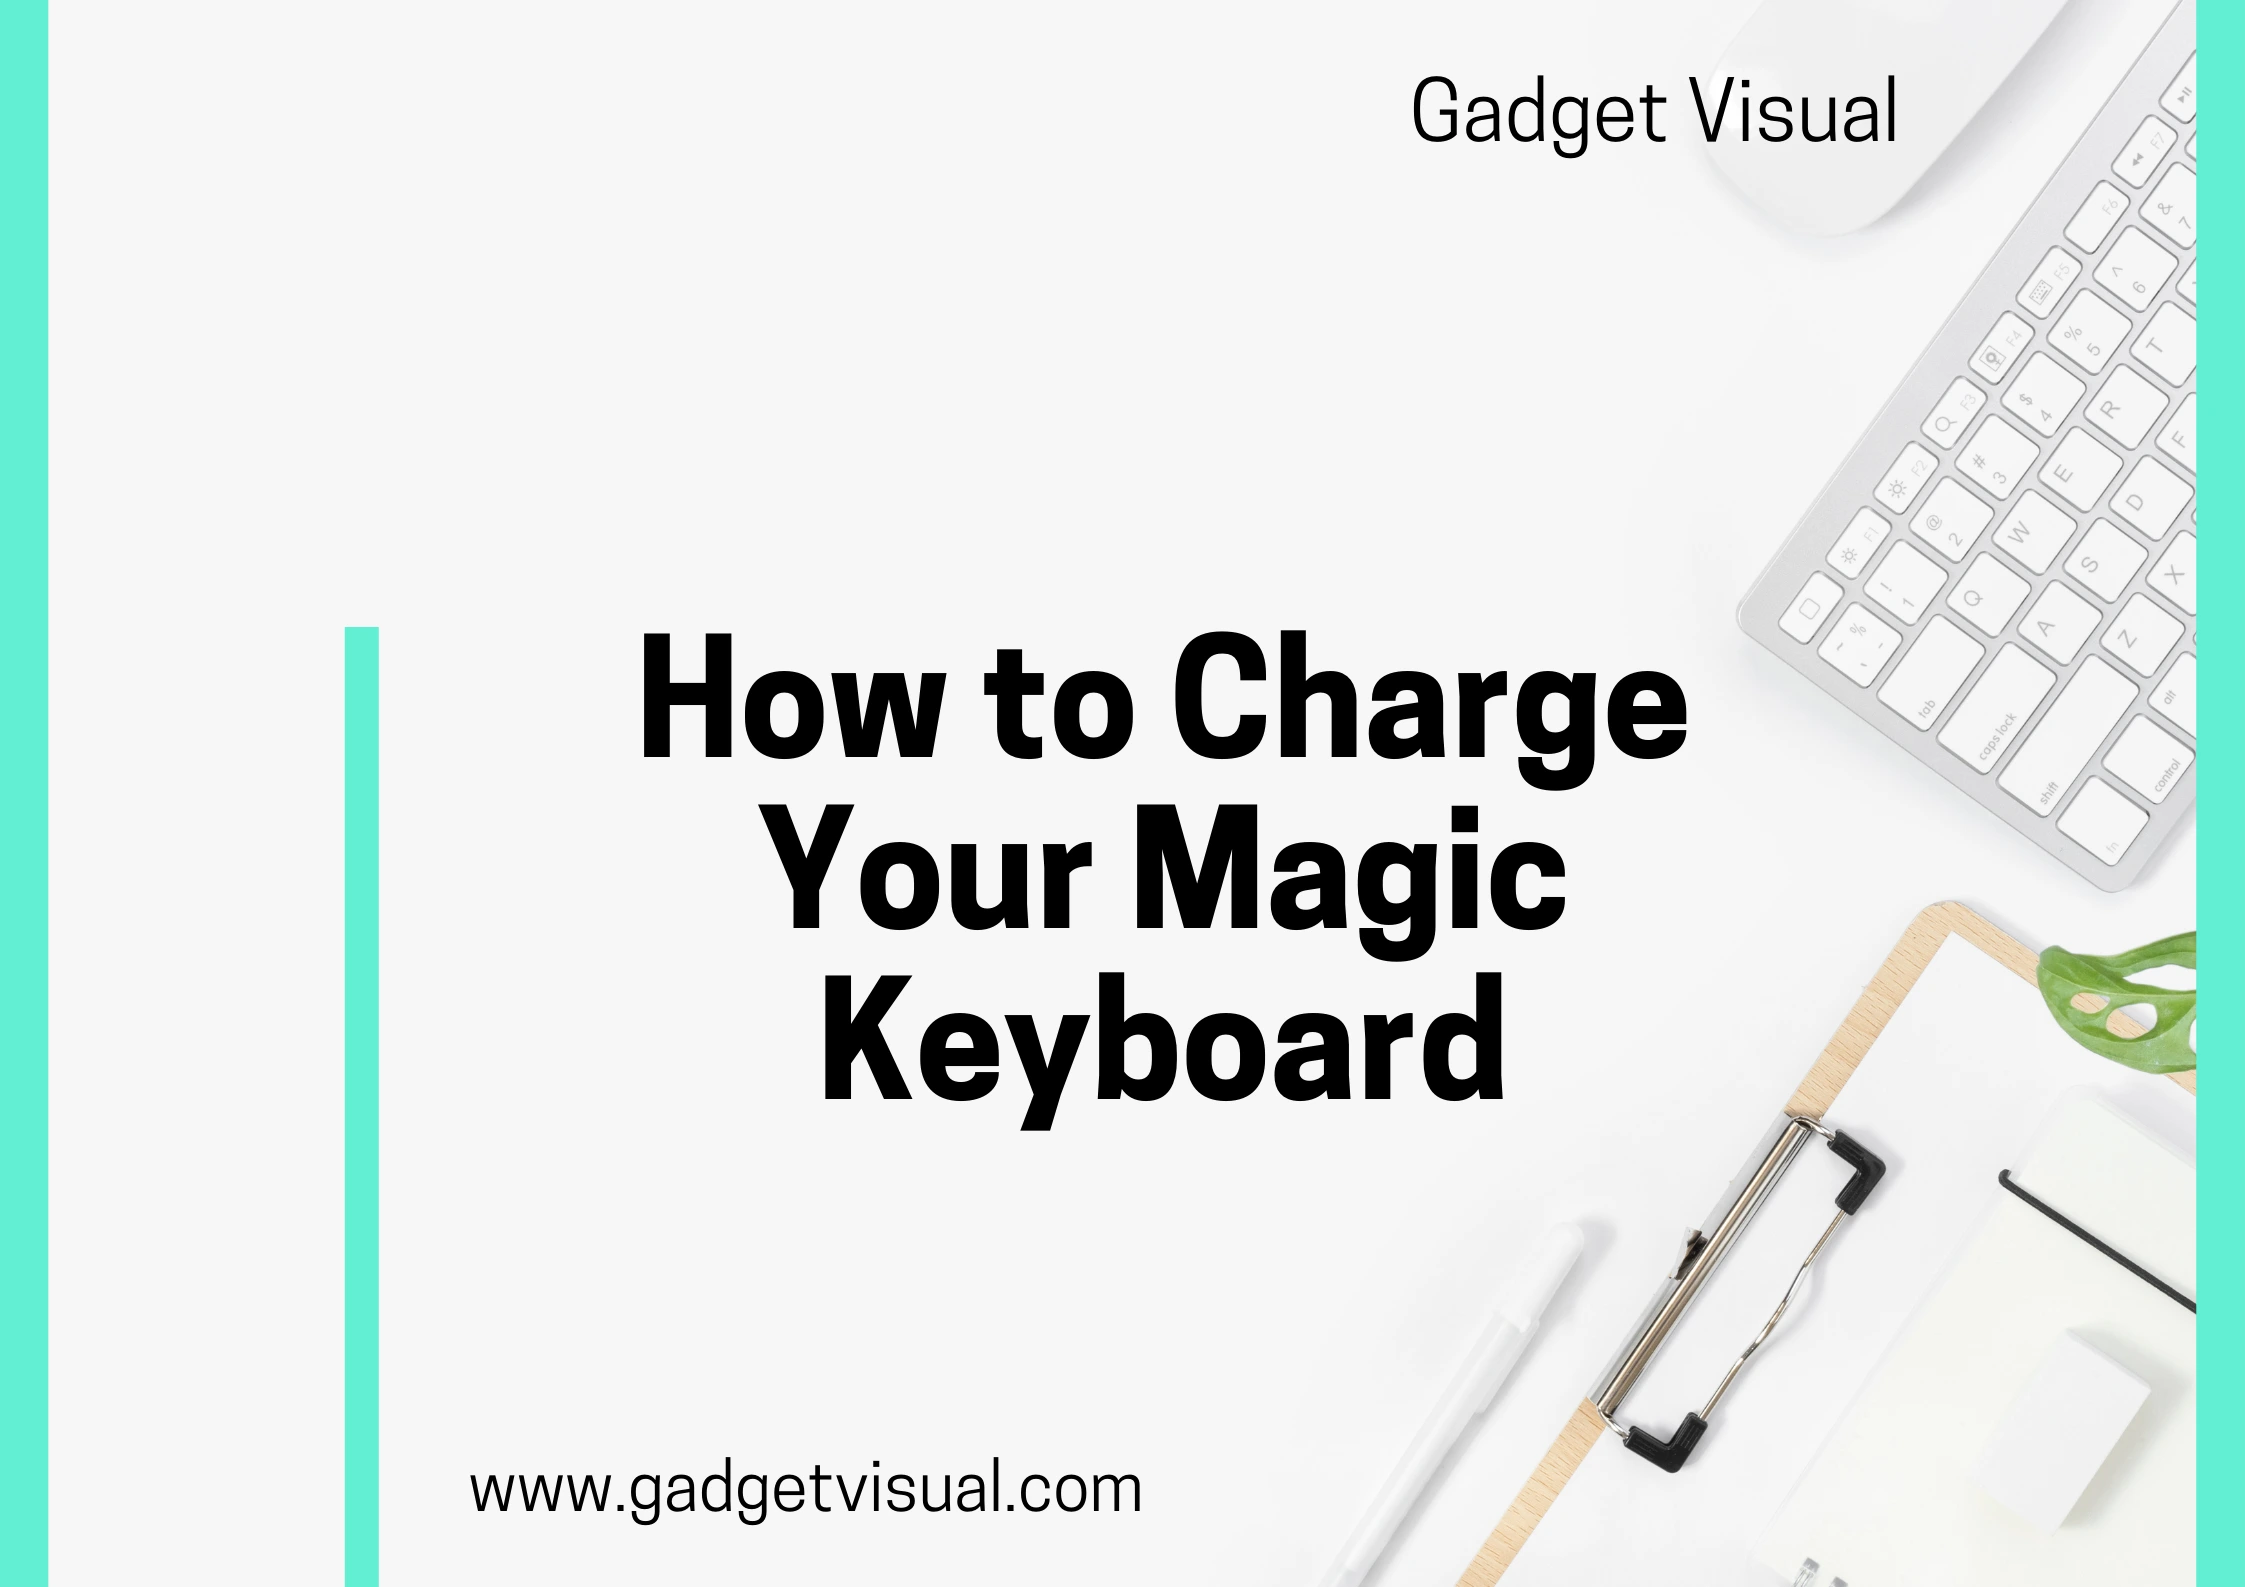 How to Charge Your Magic Keyboard